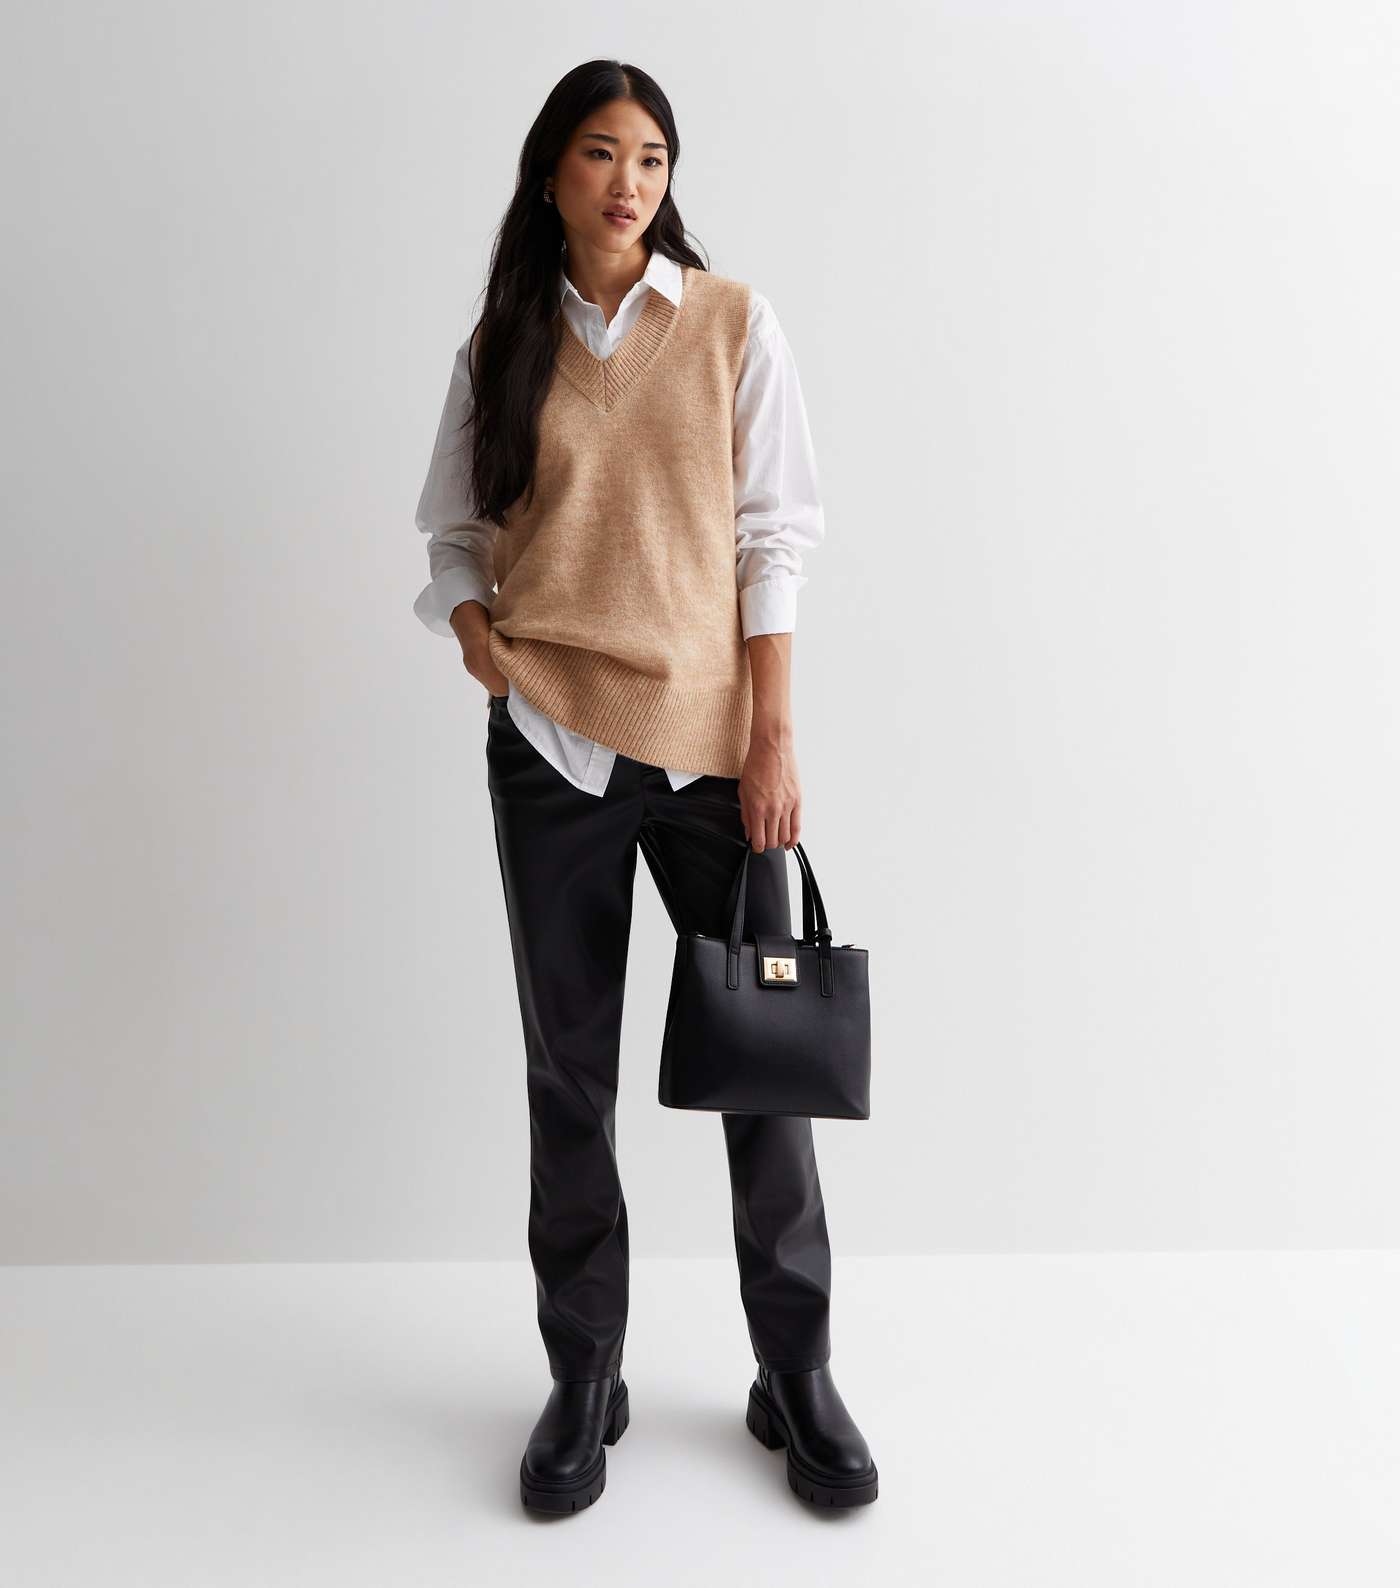 New Look relaxed fit cable knit vest in camel